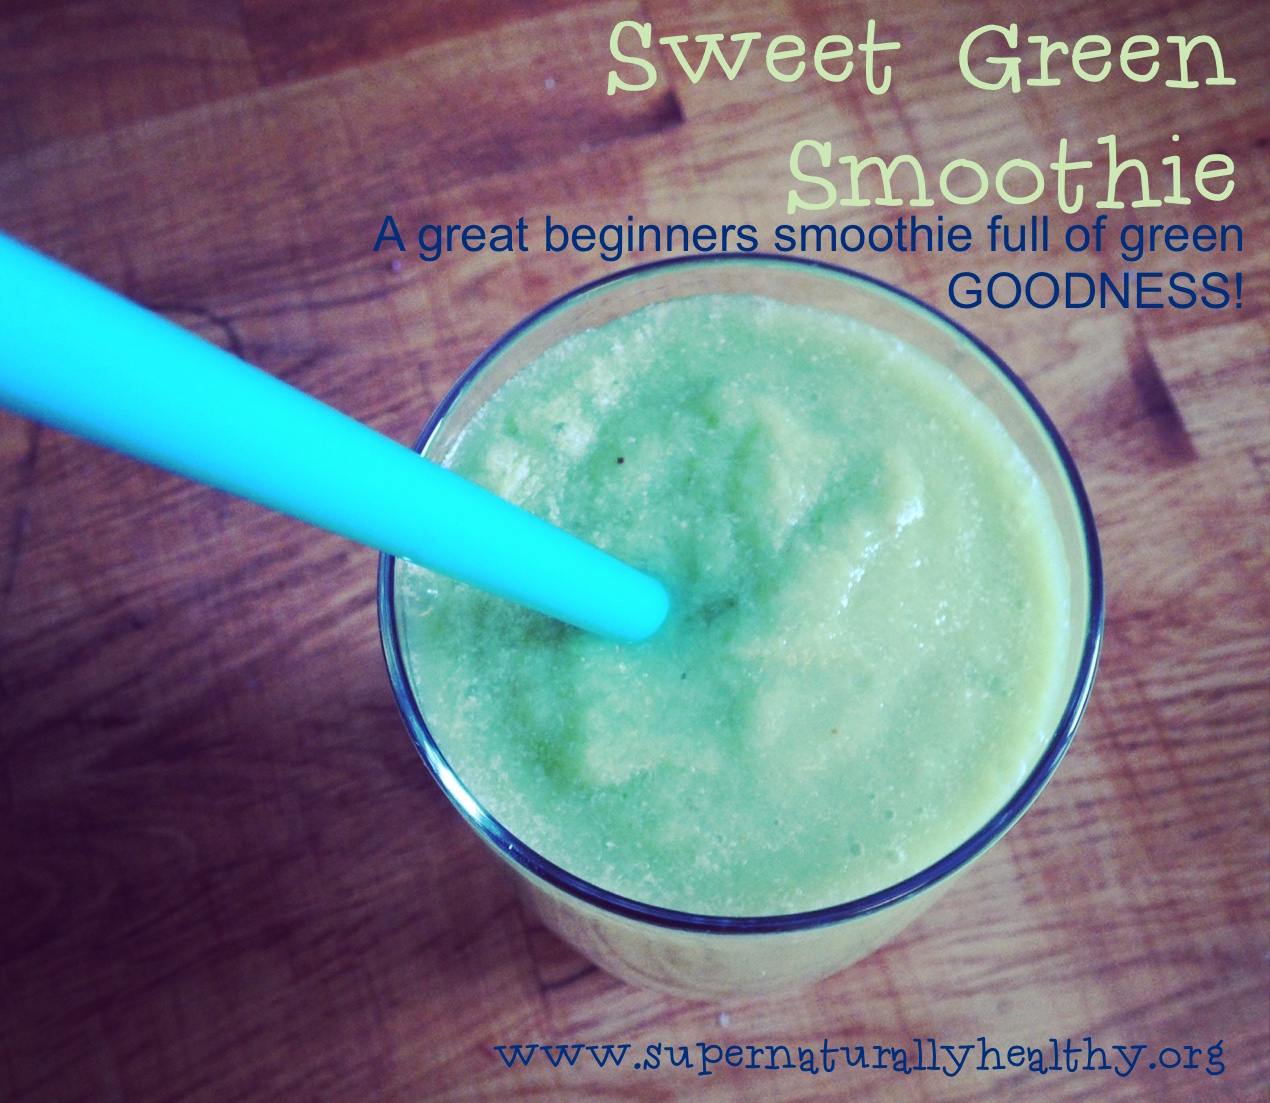 Sweet Green Smoothie Recipe & Welcome to the Green Smoothie Challenge!